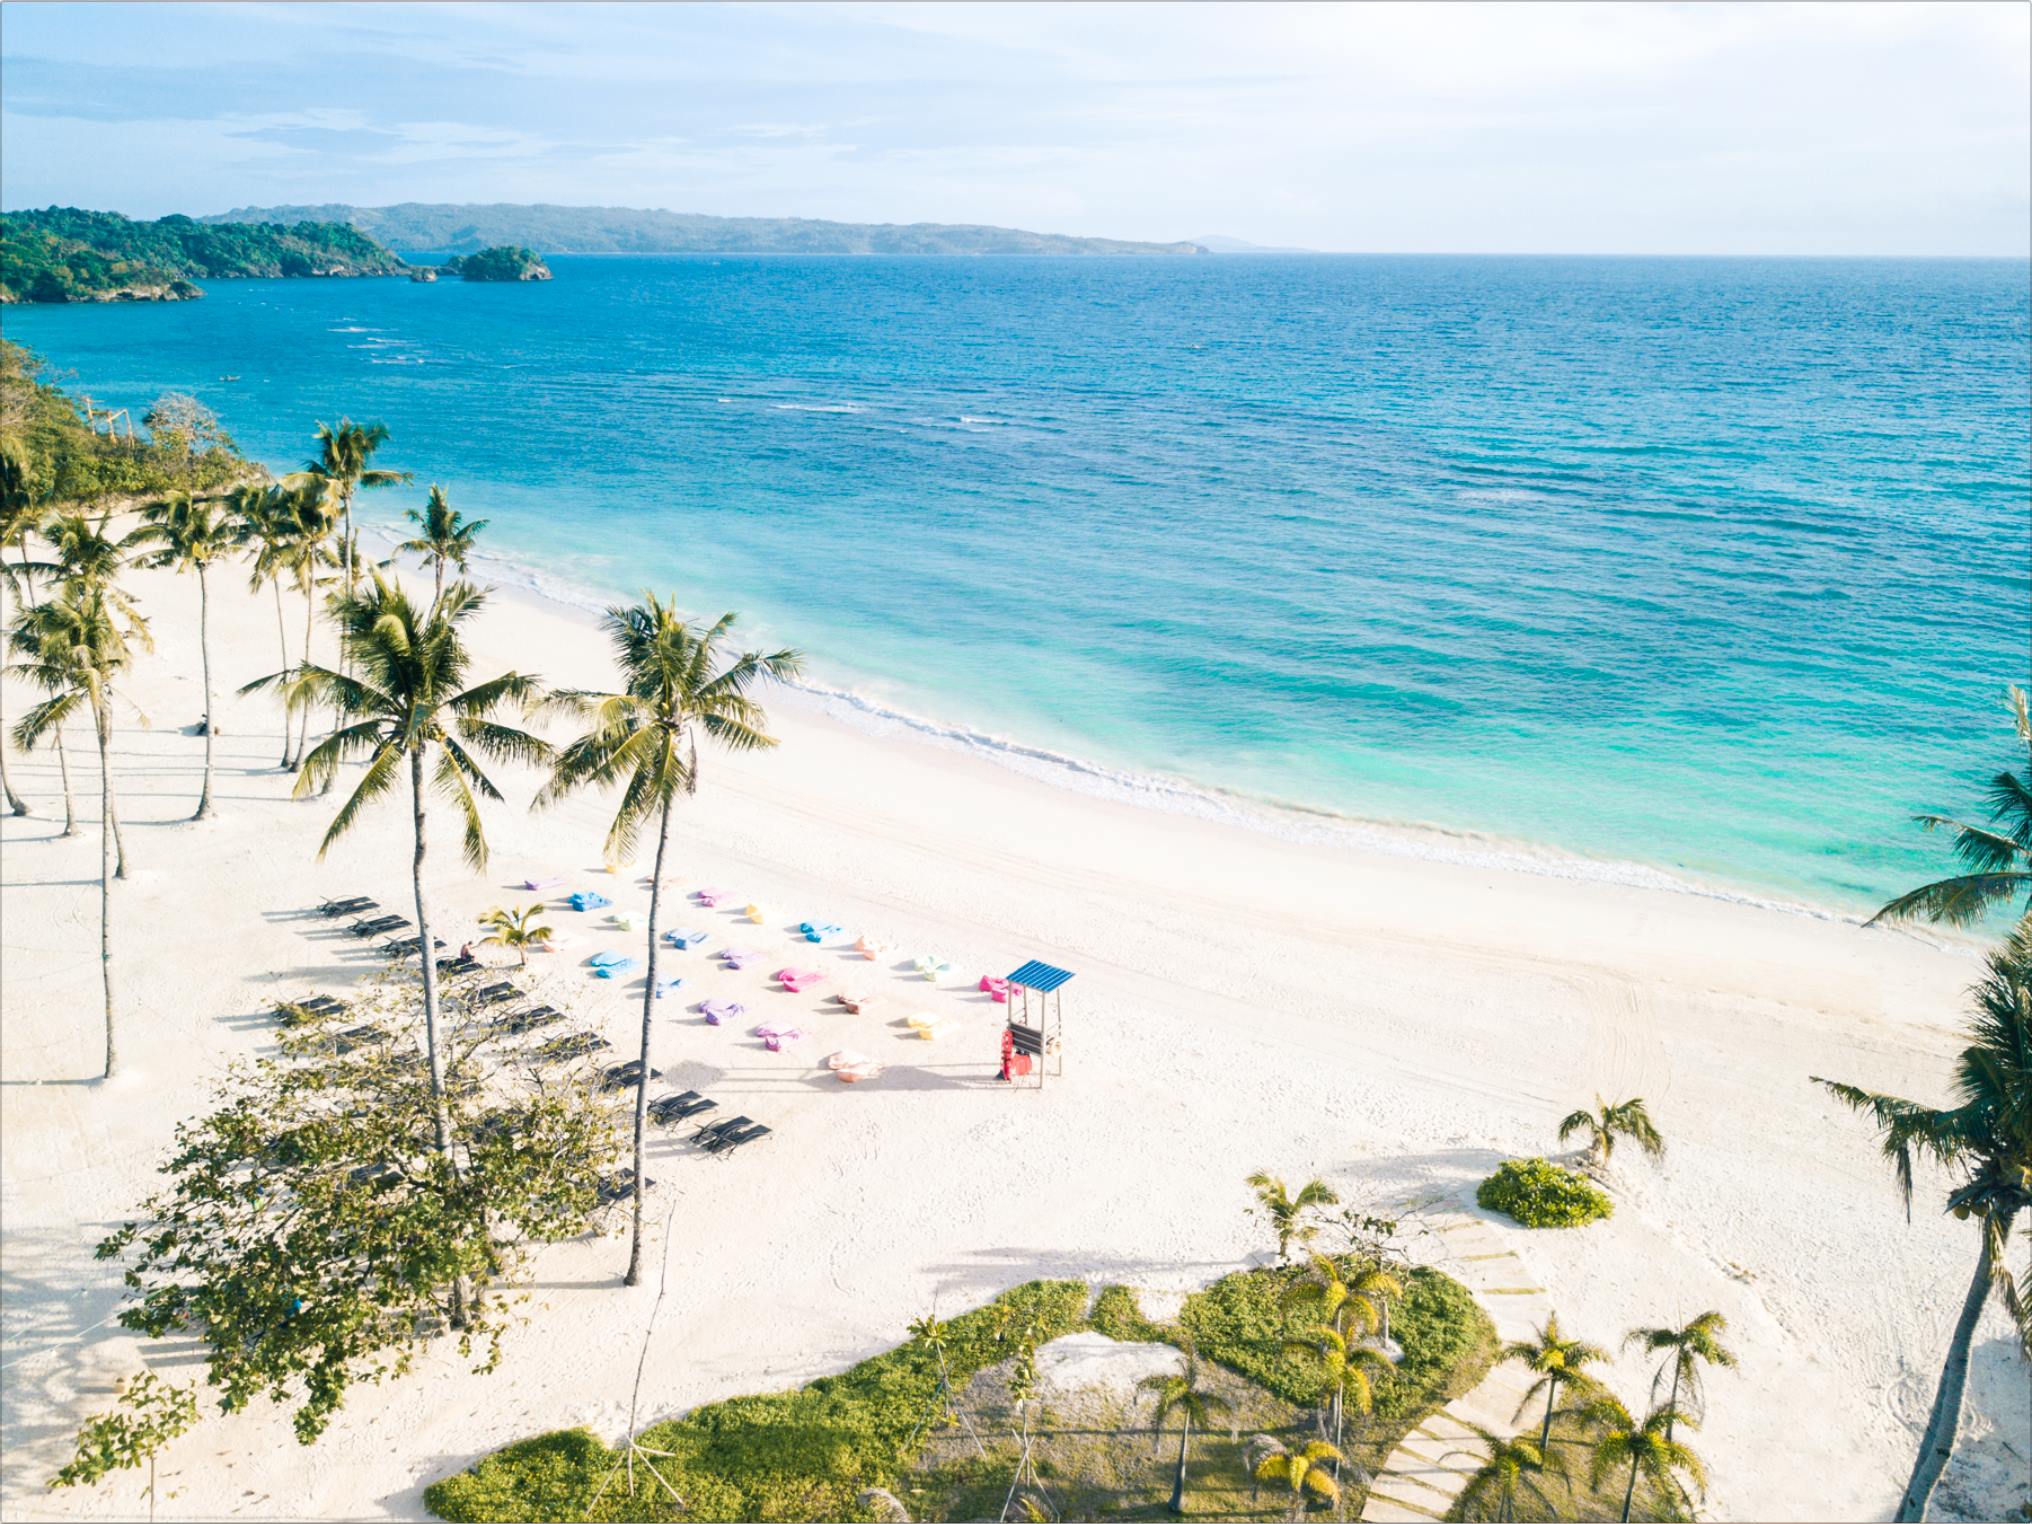 Boracay Newcoast: 6 Attractions, Hotels, and Things to Do | Guide the Philippines